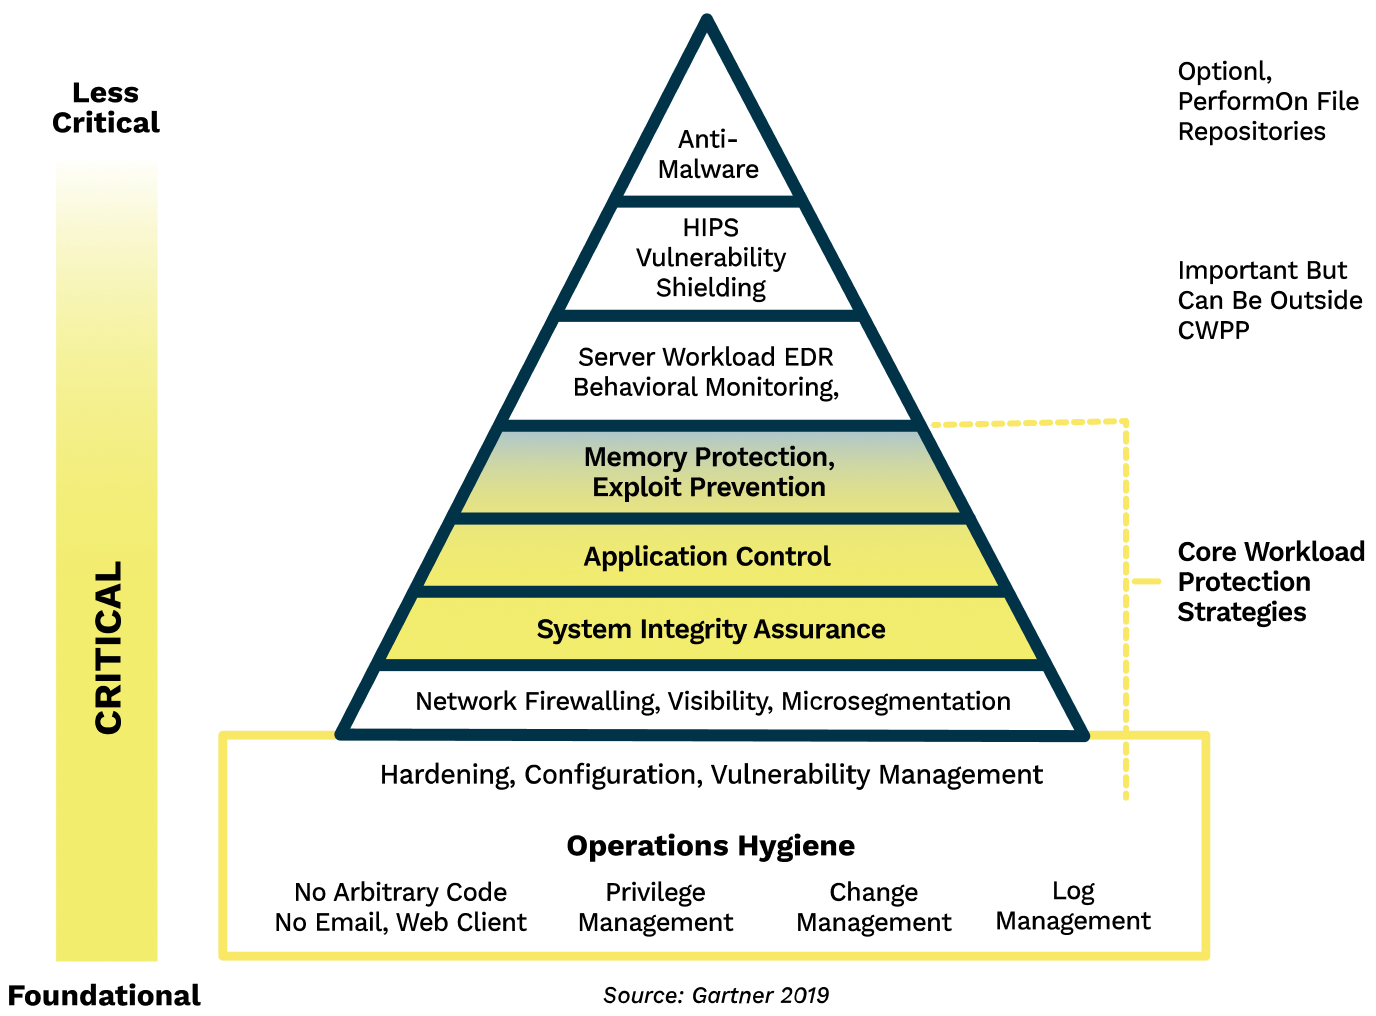  The image shows a pyramid of security controls for cloud workload management, with 'Anti-Malware', 'HIPS', 'Vulnerability Shielding', 'Server workload EDR', 'Behavioral Monitoring', 'Memory Protection', 'Exploit Prevention', 'Application Control', 'System Integrity Assurance', 'Network Firewalls', 'Visibility', 'Microsegmentation', 'Hardening', 'Configuration', and 'Vulnerability Management'.